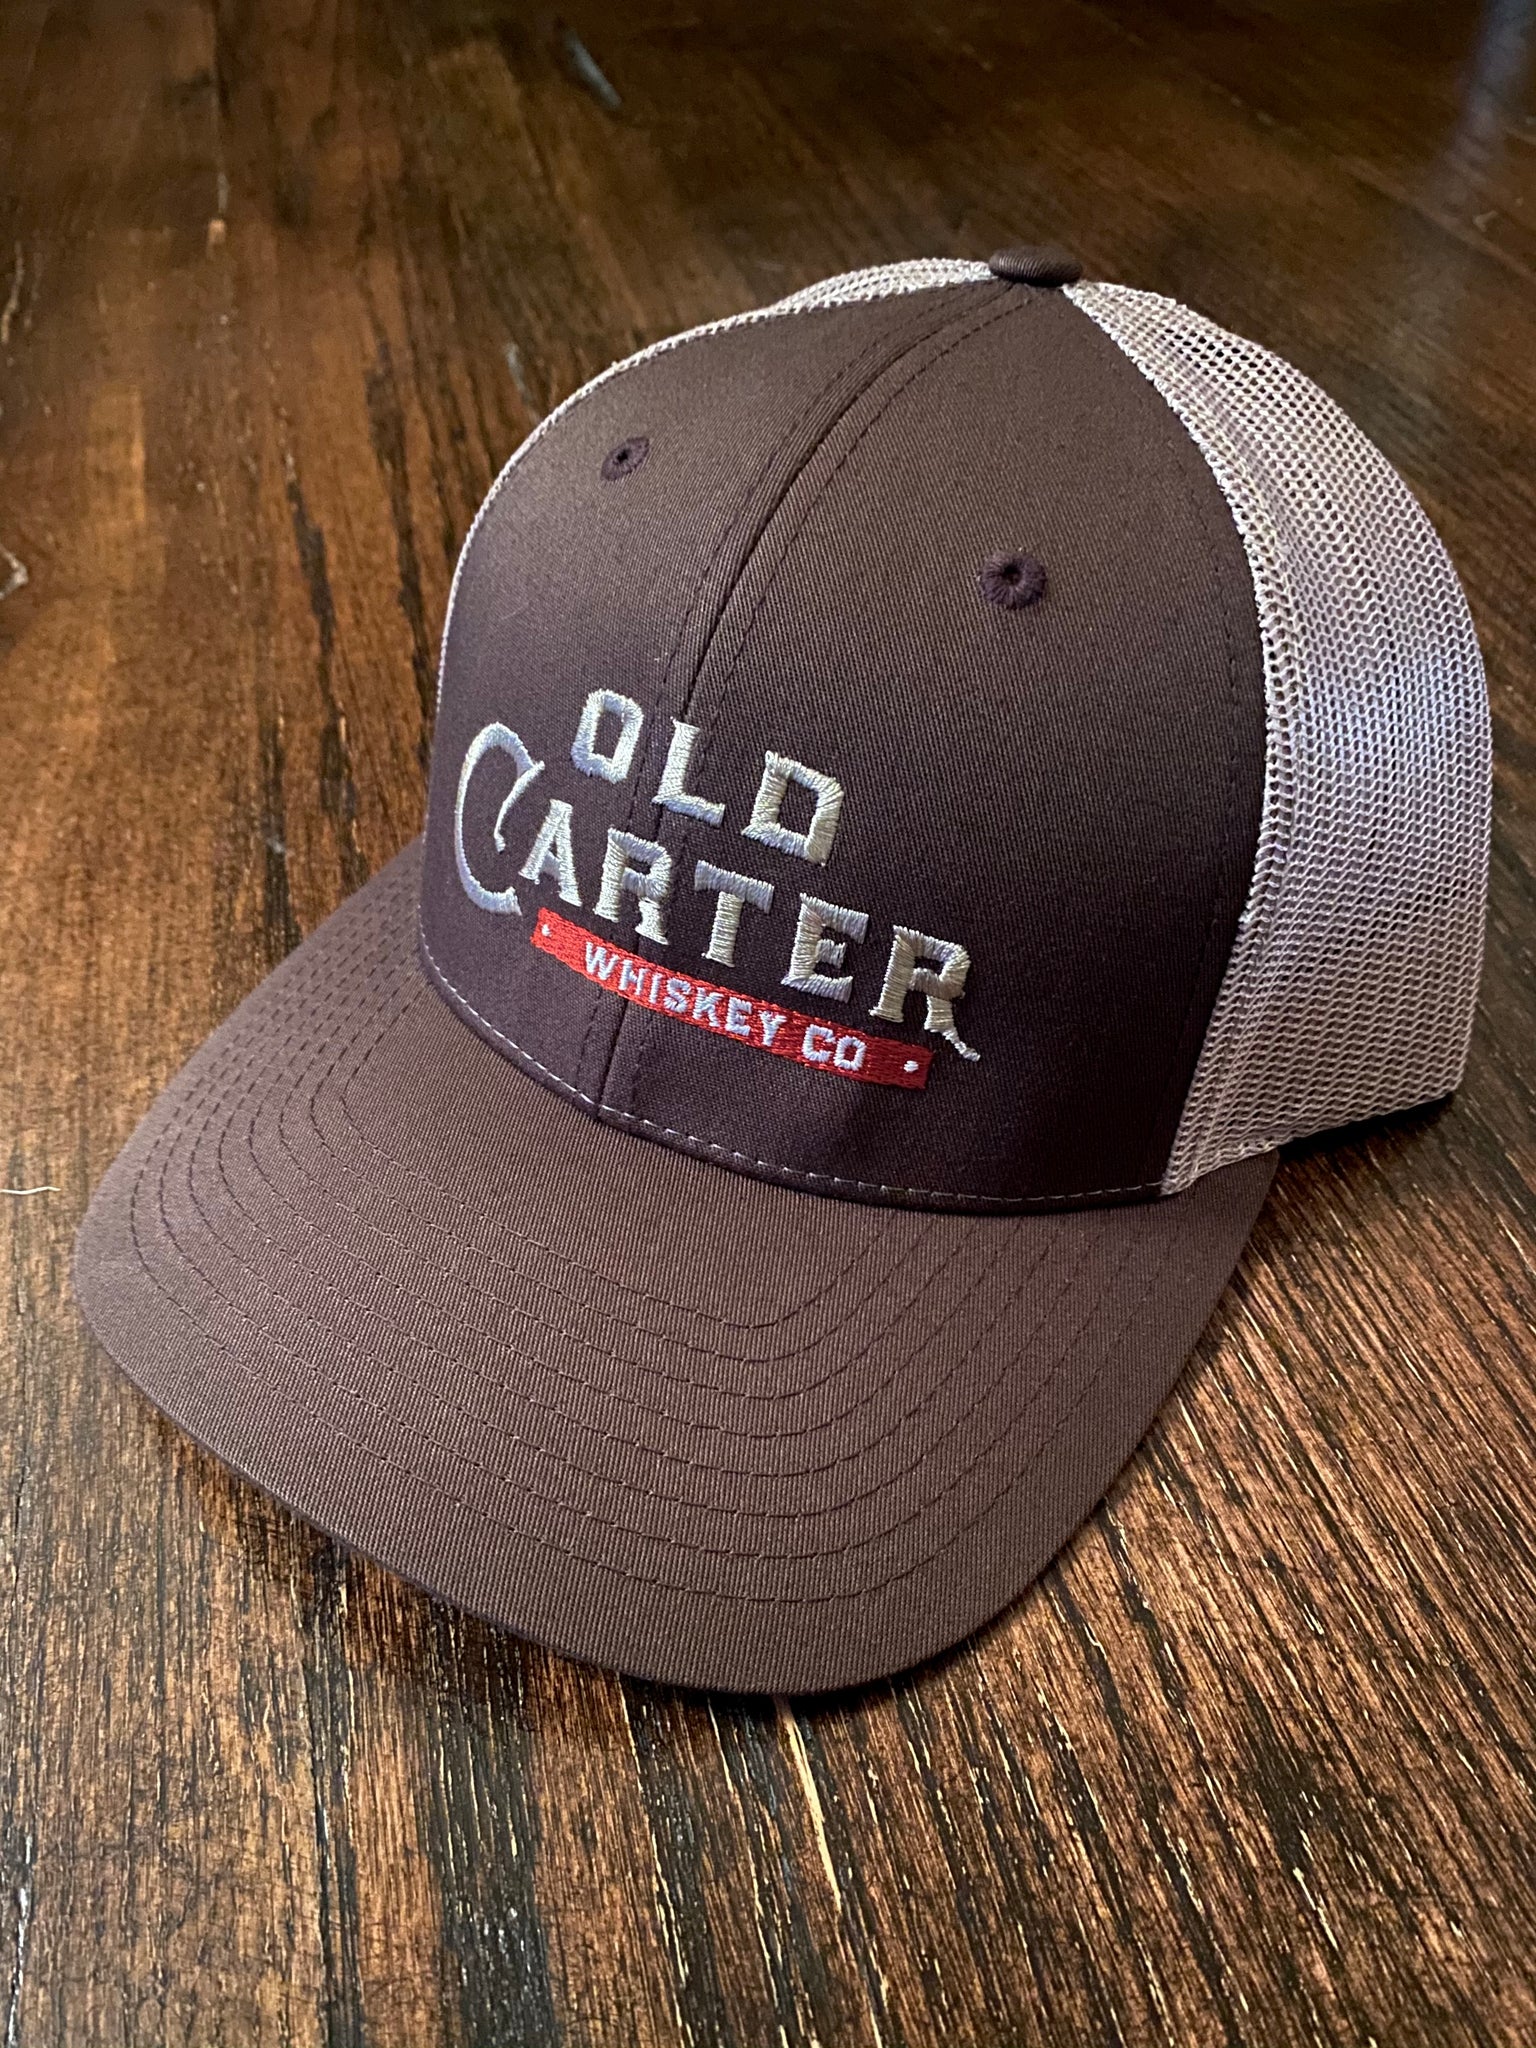 Old Louisville Whiskey Co Gray Hat